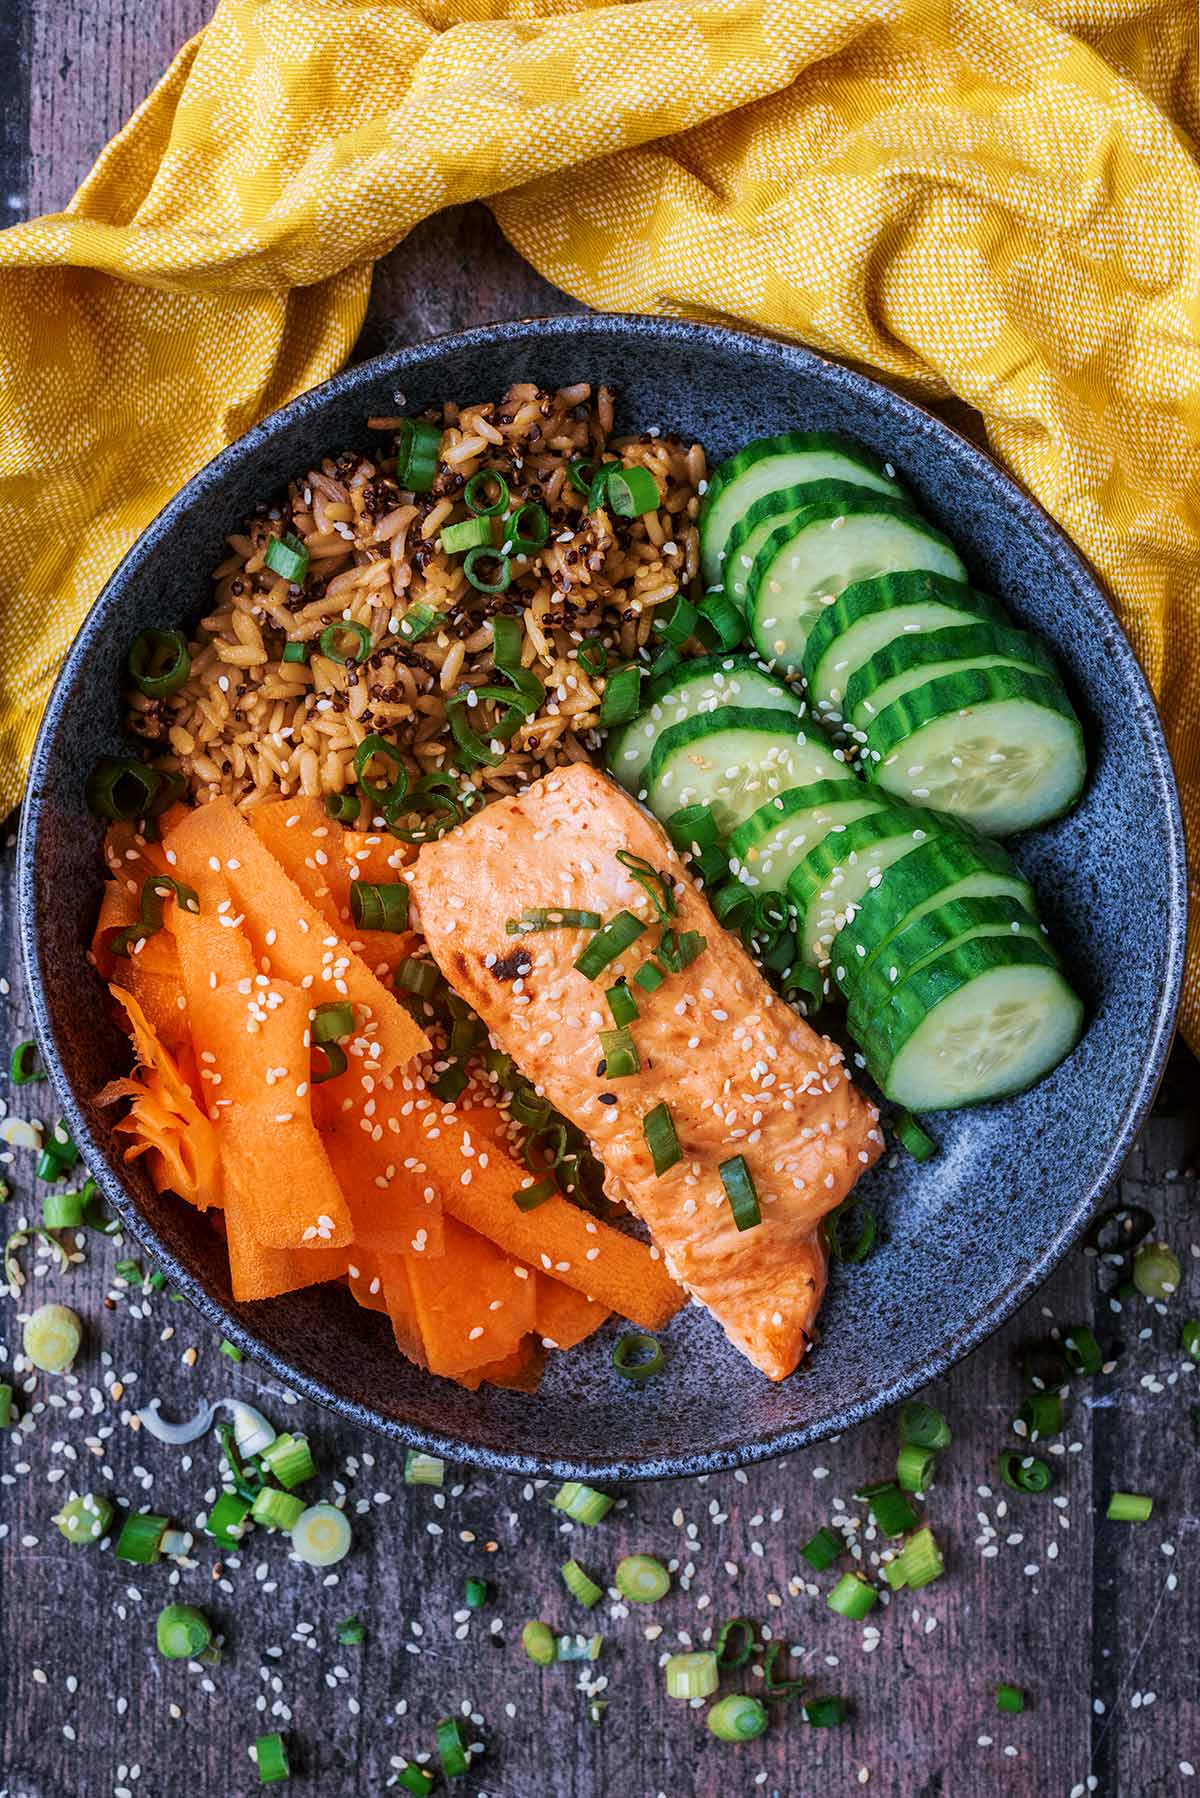 A bowl containing a cooked salmon fillet, some rice, ribboned carrot and sliced cucumber.